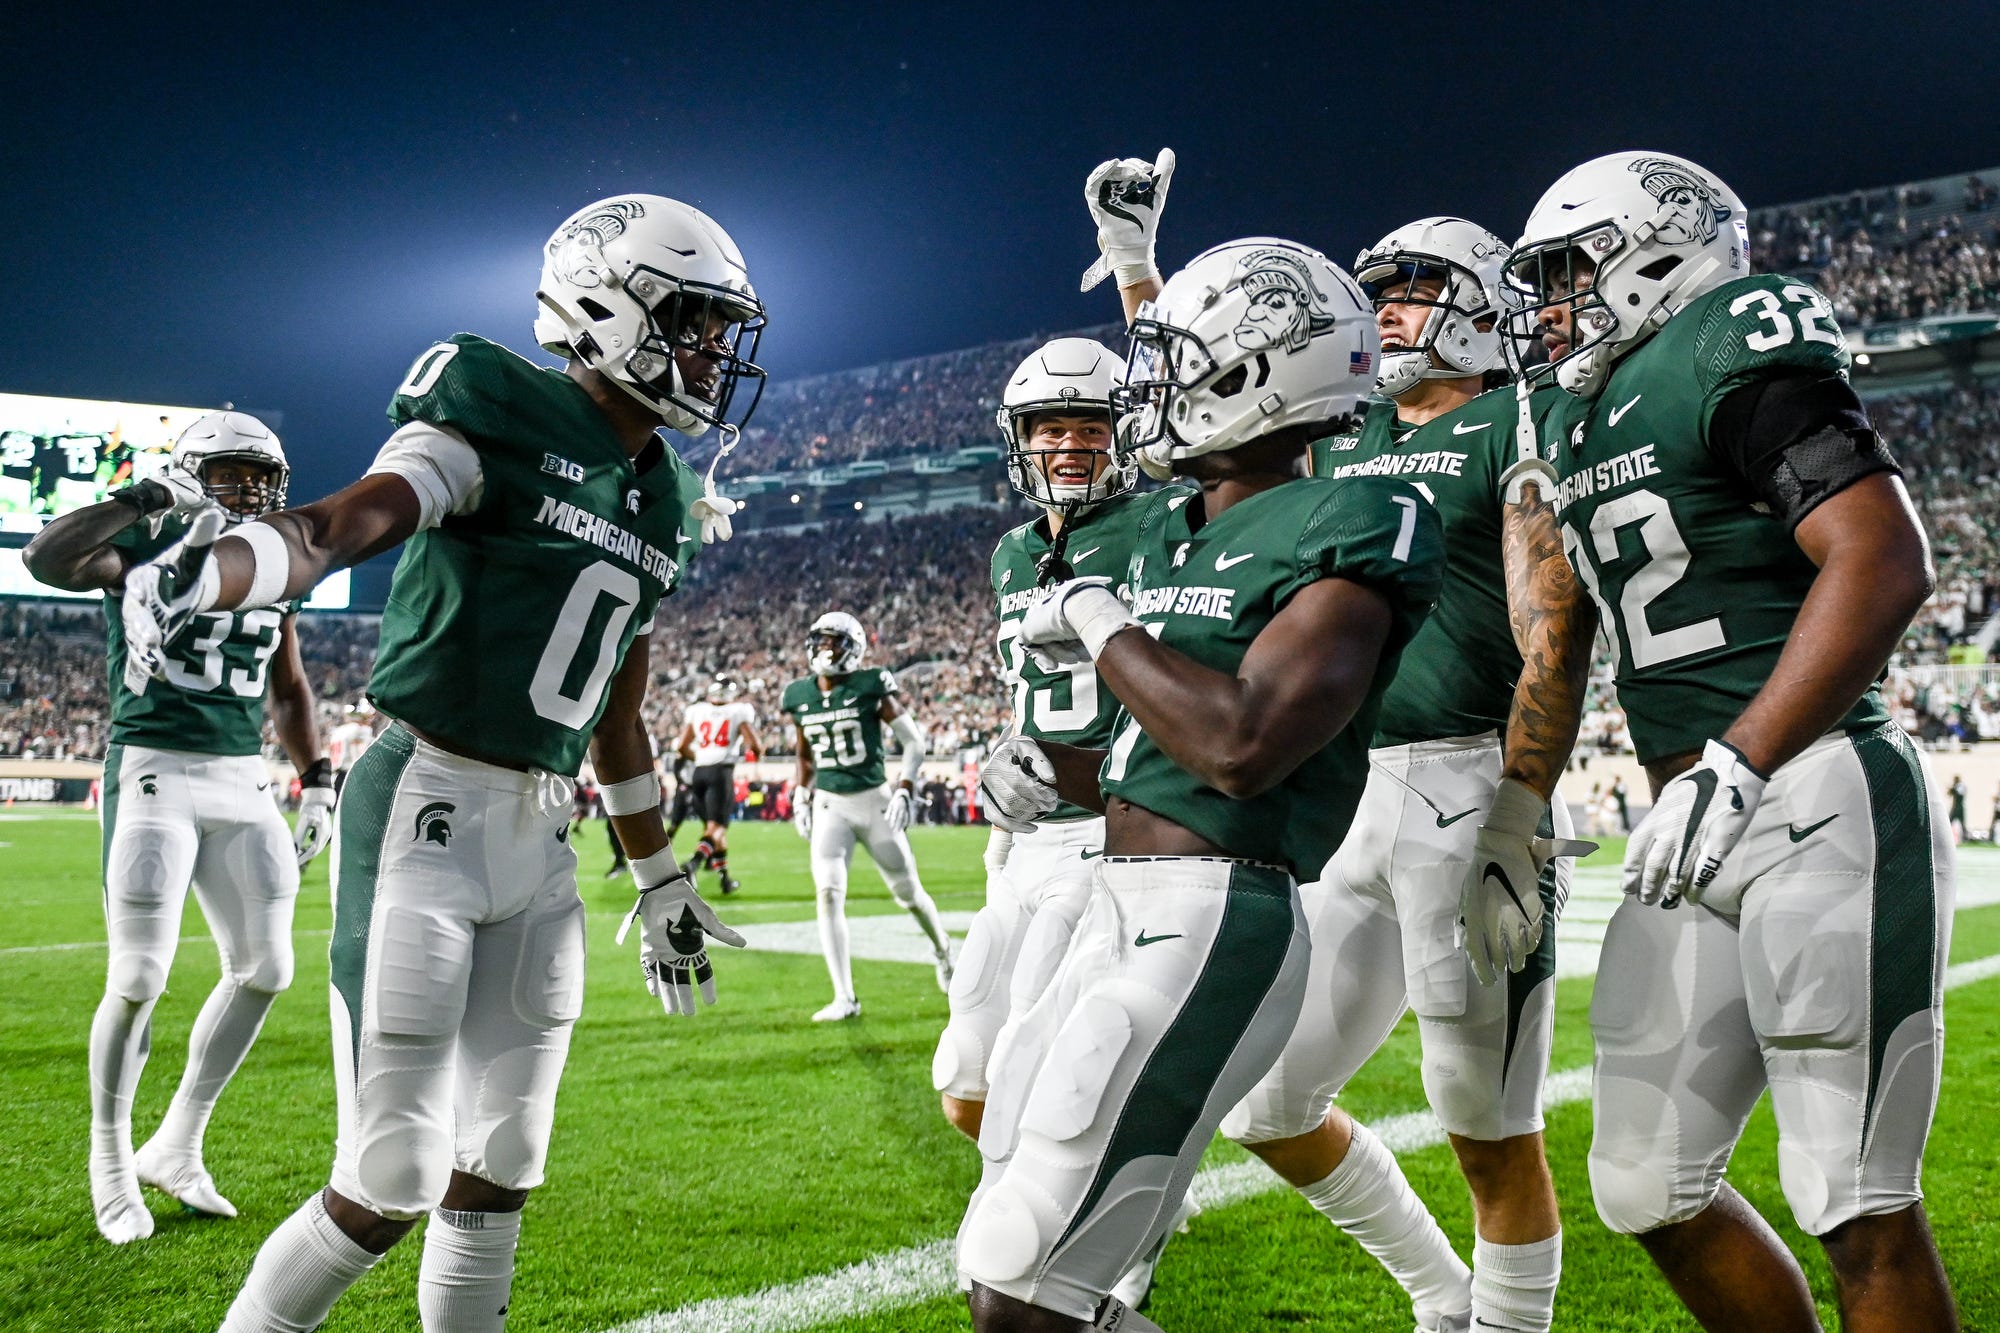 Michigan State Football Schedule 2022 Printable Msu Football's 2022 Big Ten Schedule Unveiled: 3 Quick Takes